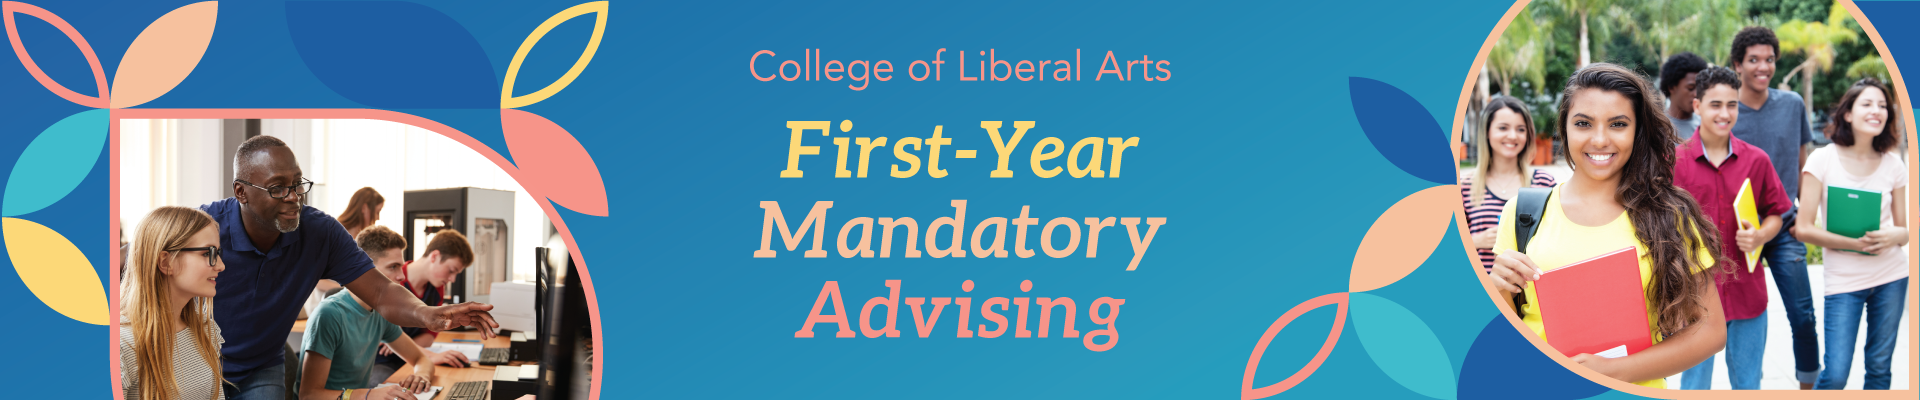 College of Liberal Arts First-Year Mandatory Advising